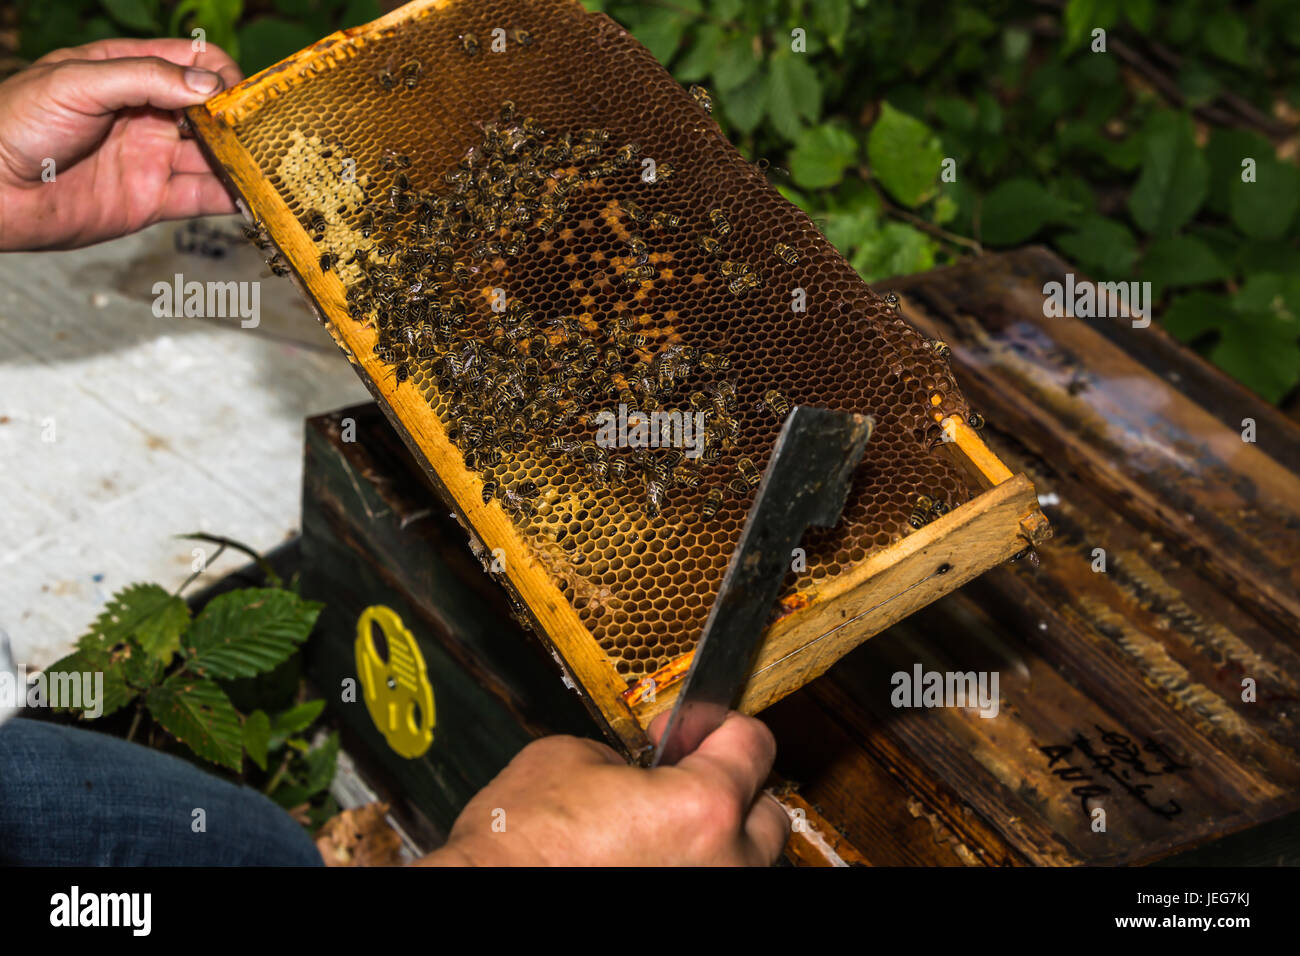 beekeeper with hive tool in the hand, checks honeycomb with bees removed from the hive Stock Photo